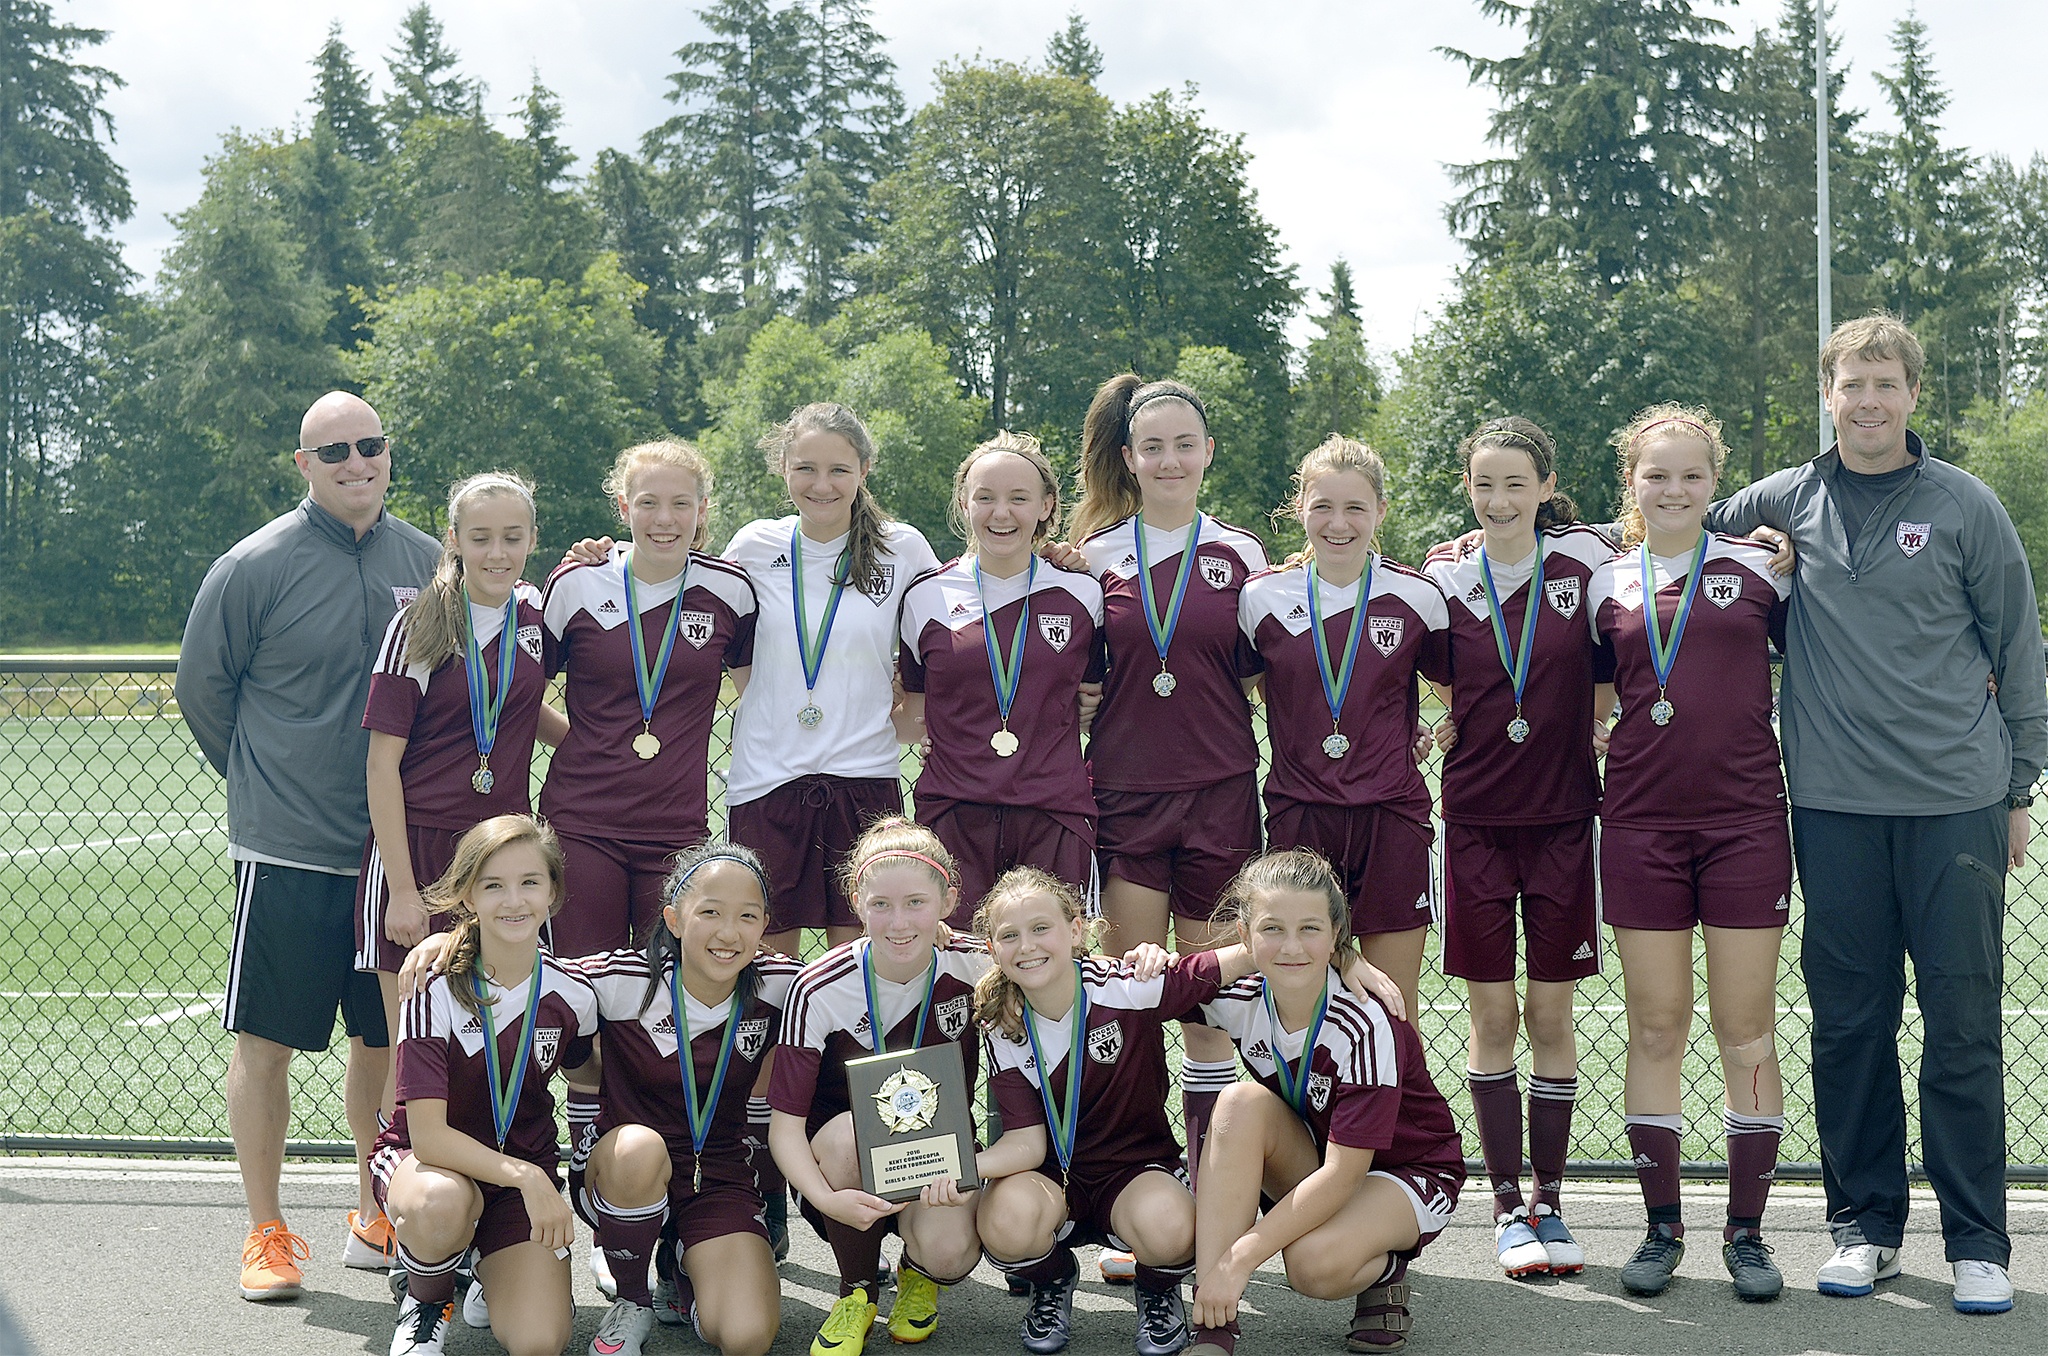 The Mercer Island FC Girls U15 Thunder beat Kitsap County’s Silver FC 2-1 to win the GU15 division at the Kent Cornucopia tournament (photo courtesy of Billy Pruchno).